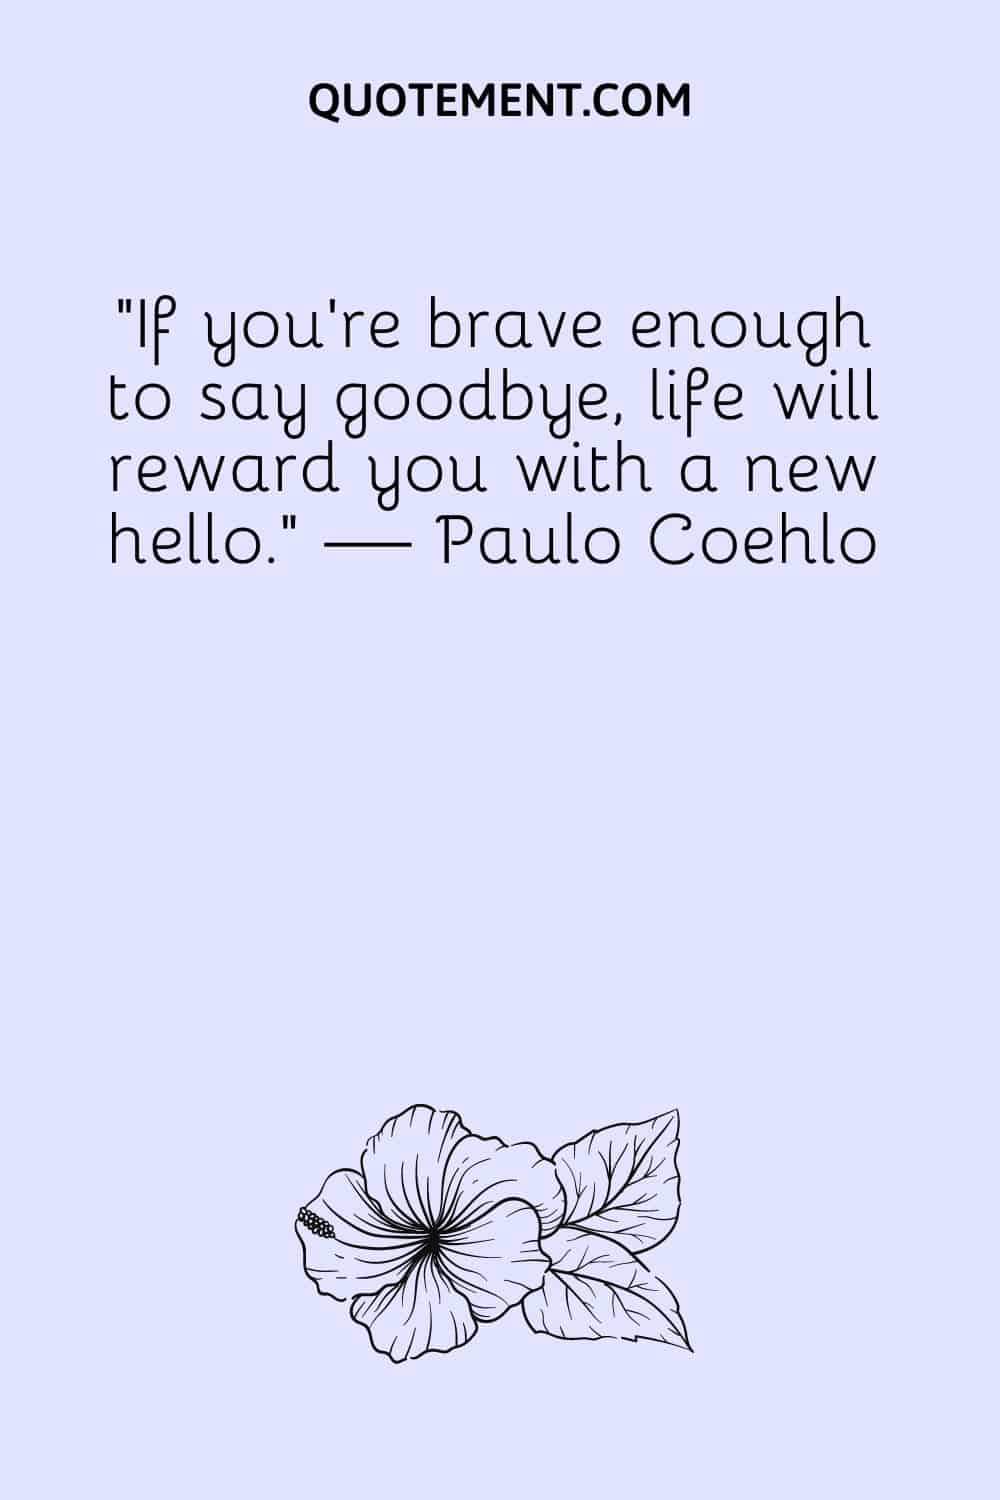 life will reward you with a new hello